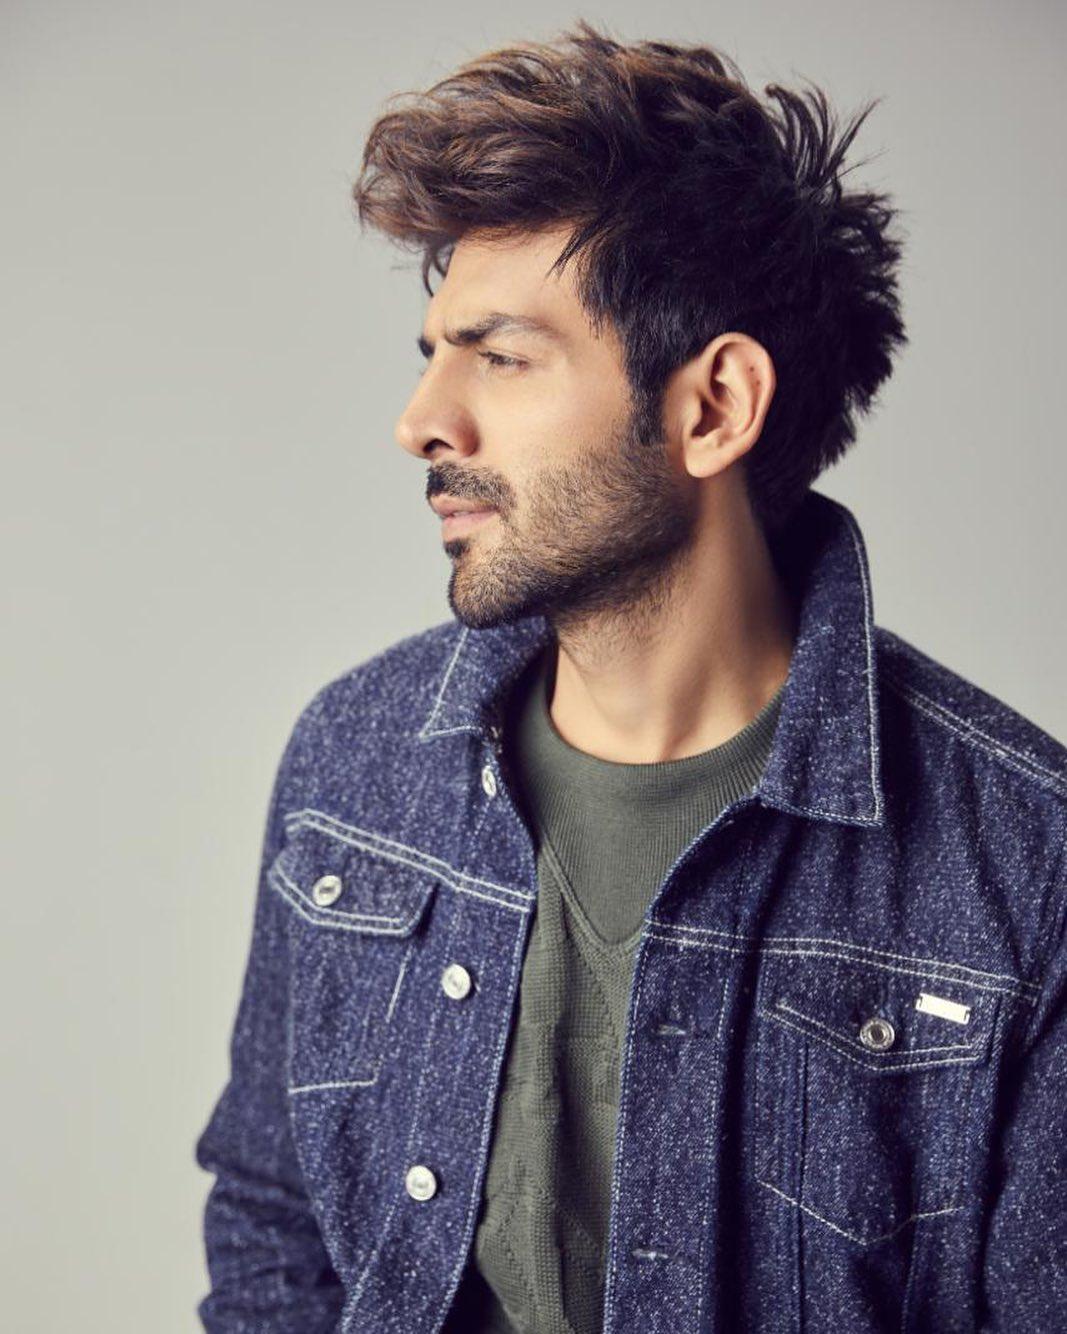 Kartik Aaryan Surely Knows How To Make His Fans Happy & Here's Proof